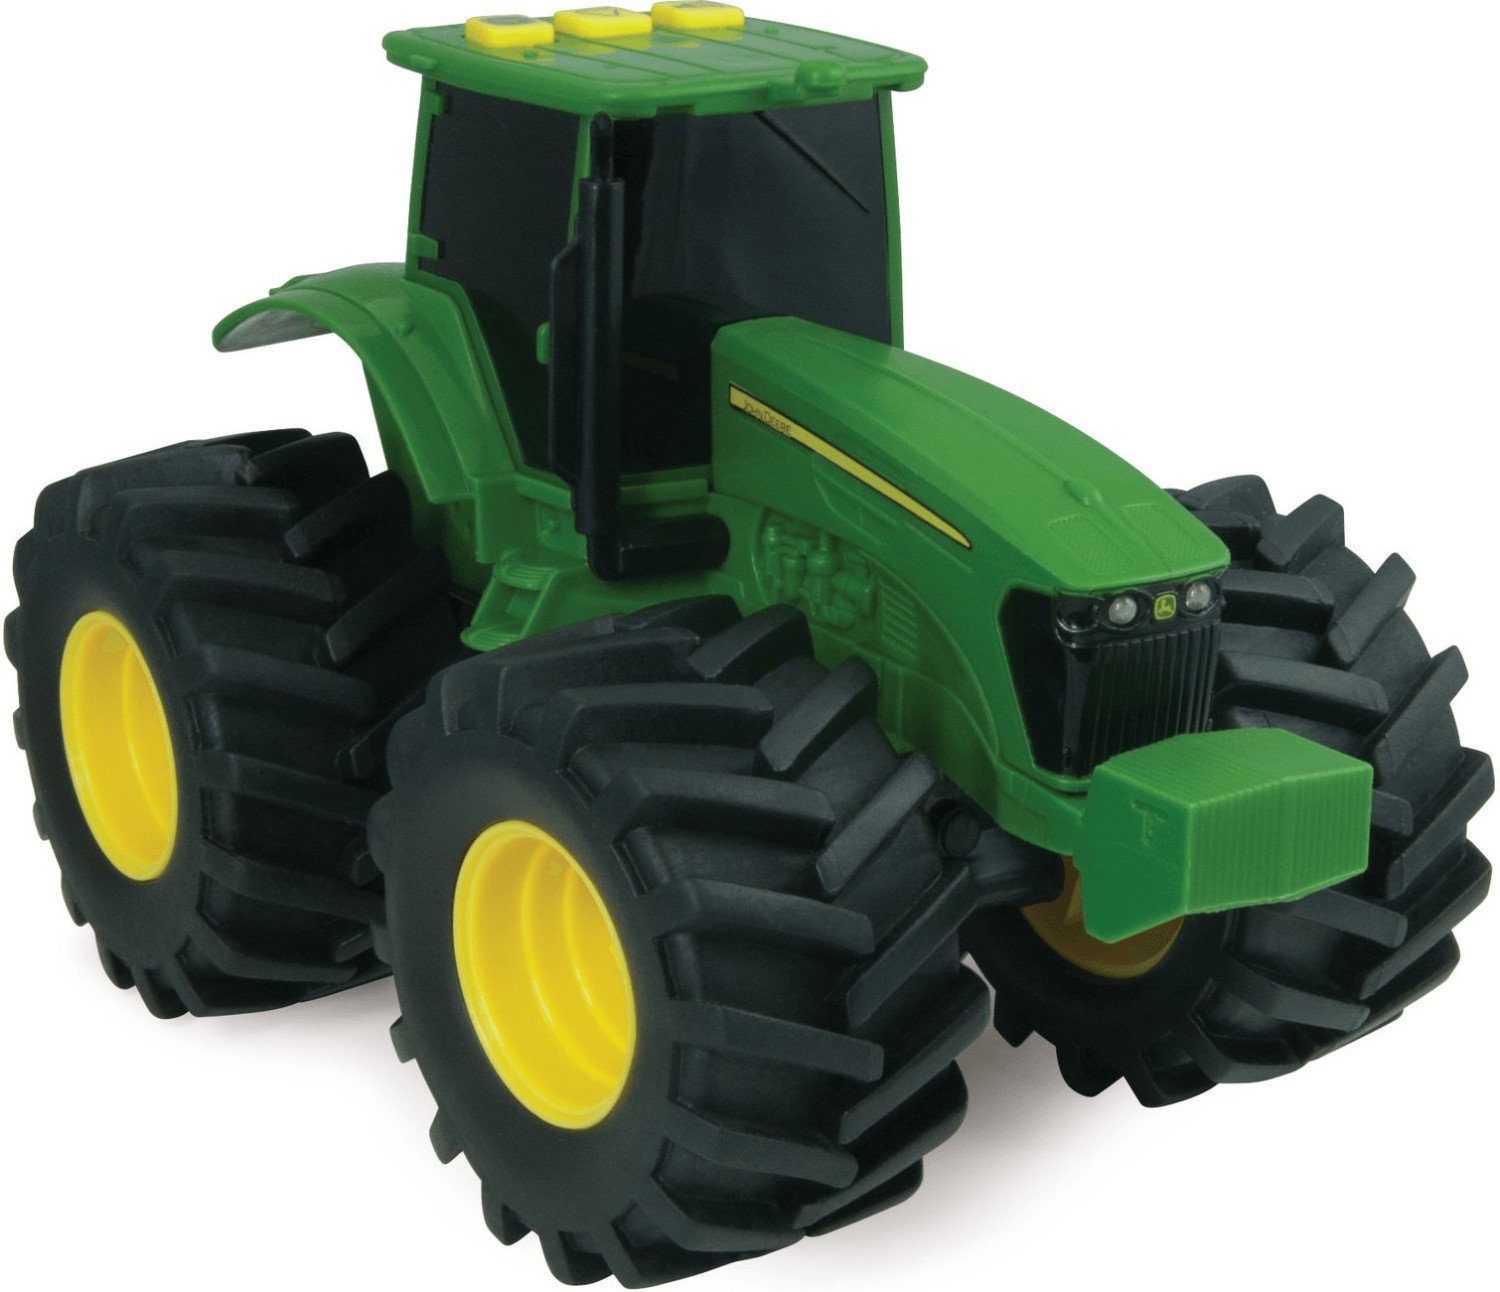 TOMY John Deere Monster Treads Lights And Sound Tractor